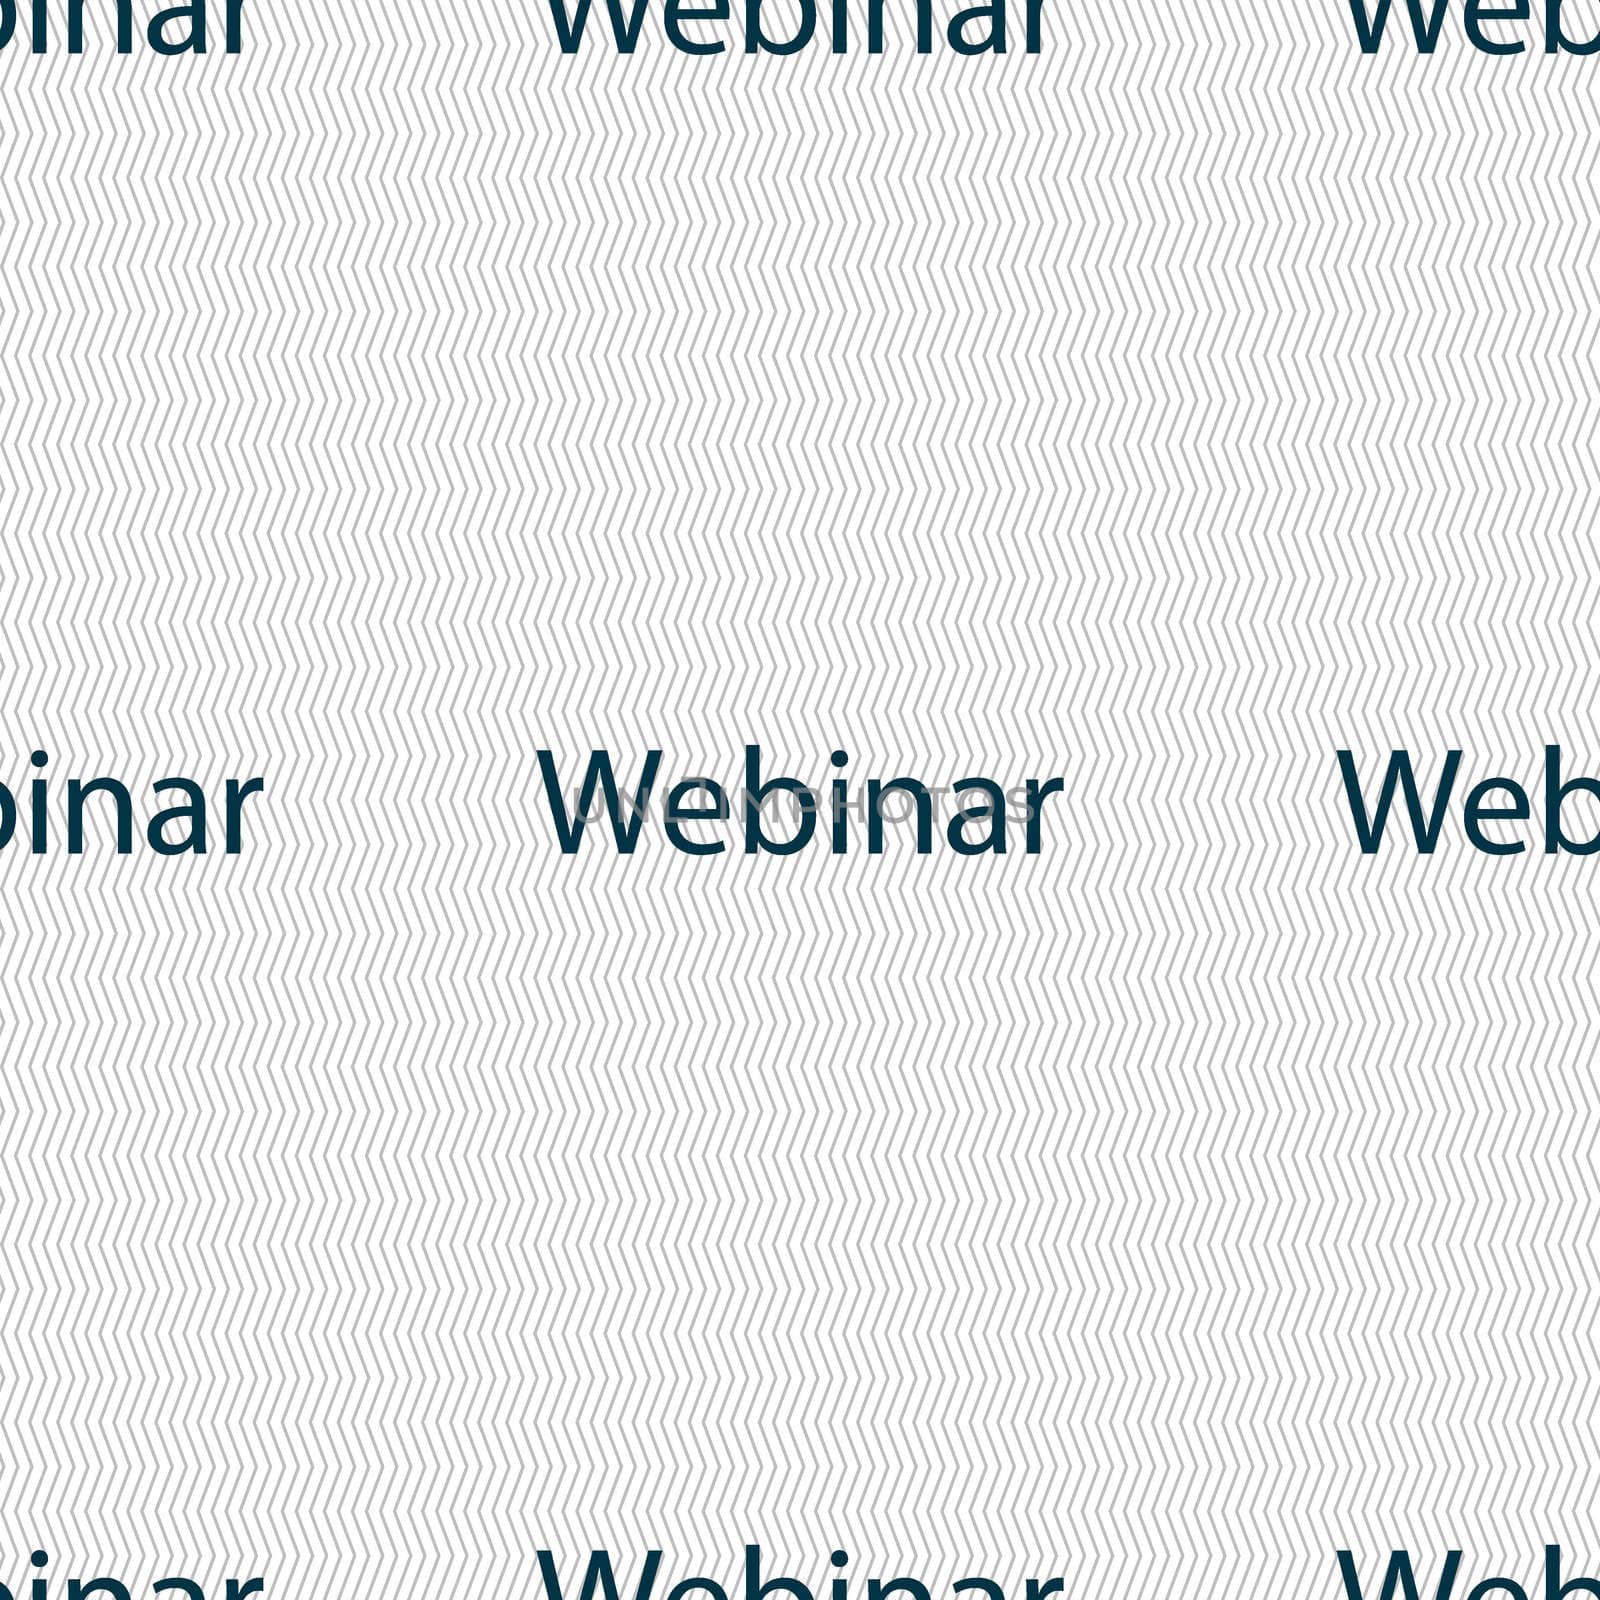 Webinar web camera sign icon. Online Web-study symbol. Seamless abstract background with geometric shapes. illustration